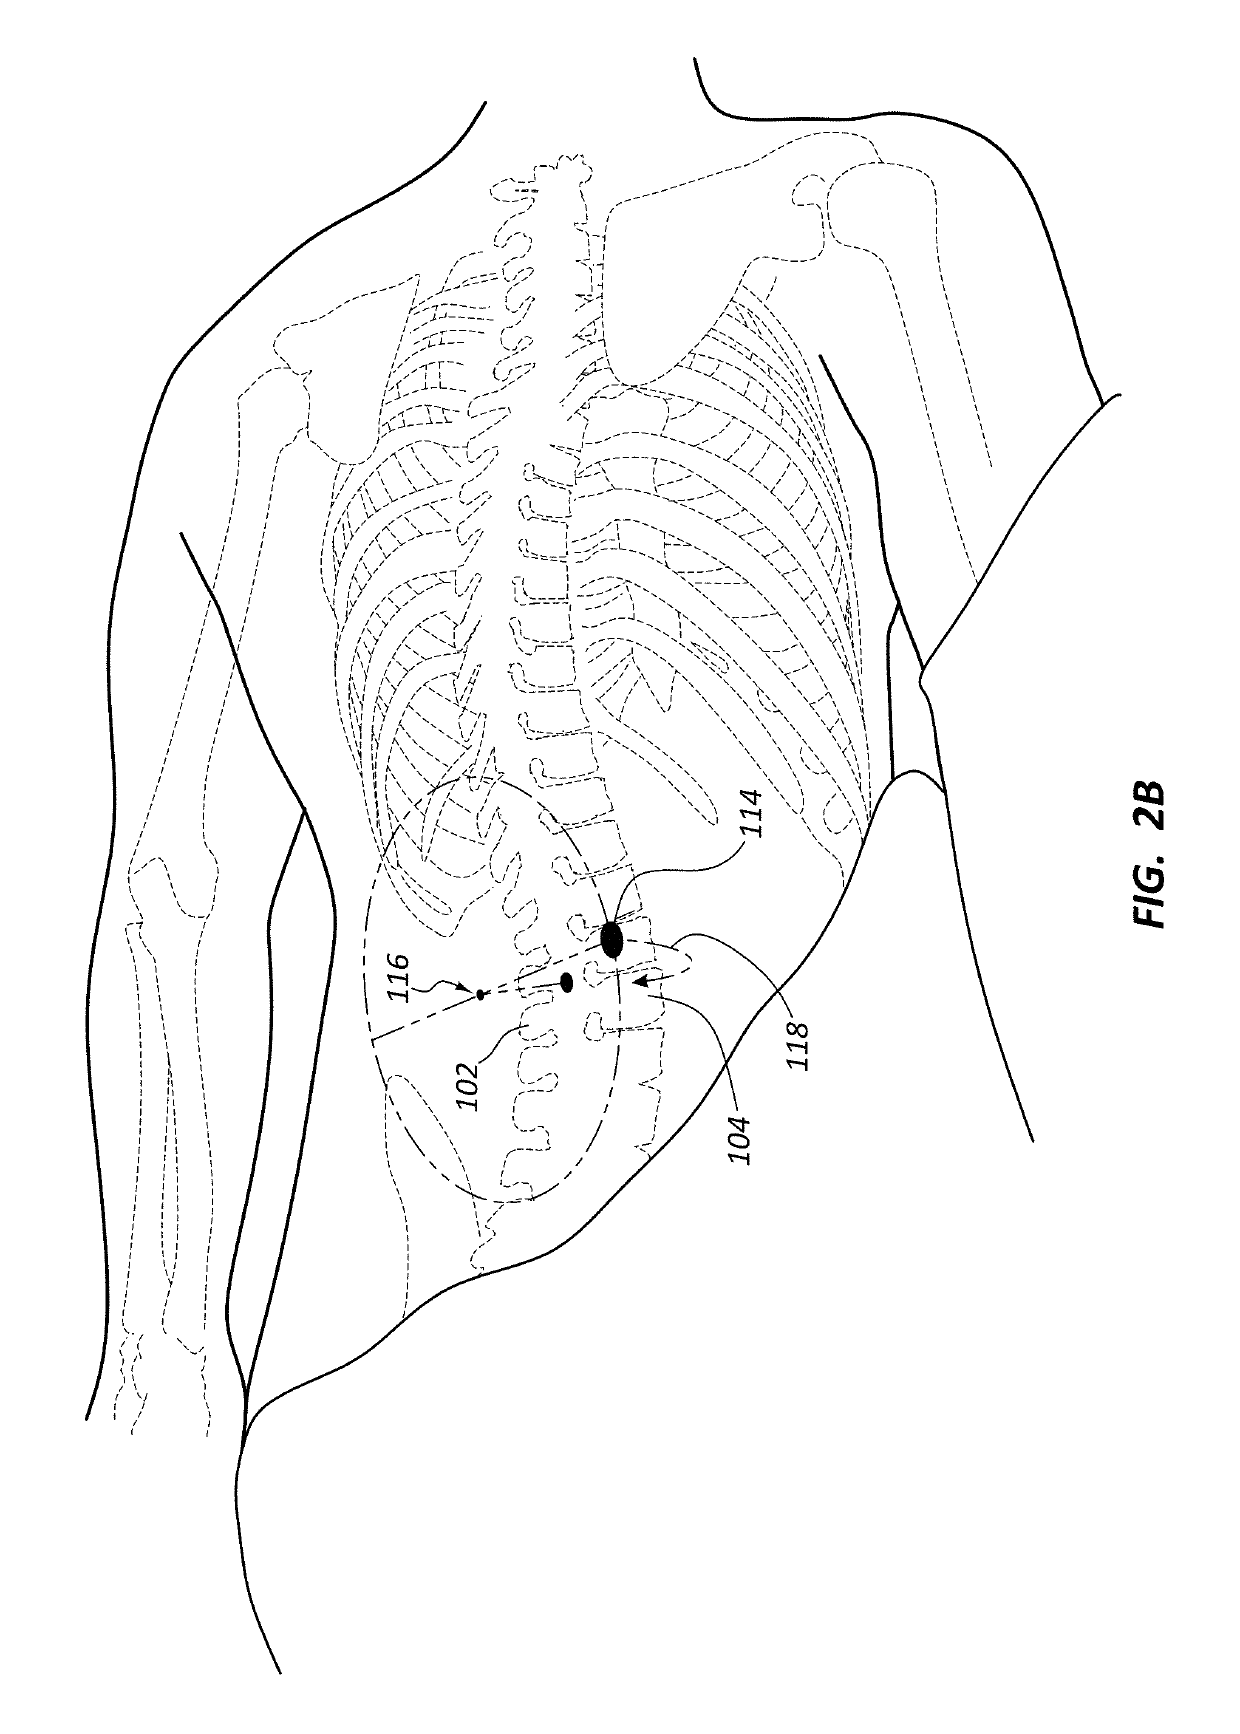 Posterior to lateral interbody fusion approach with associated instrumentation and implants